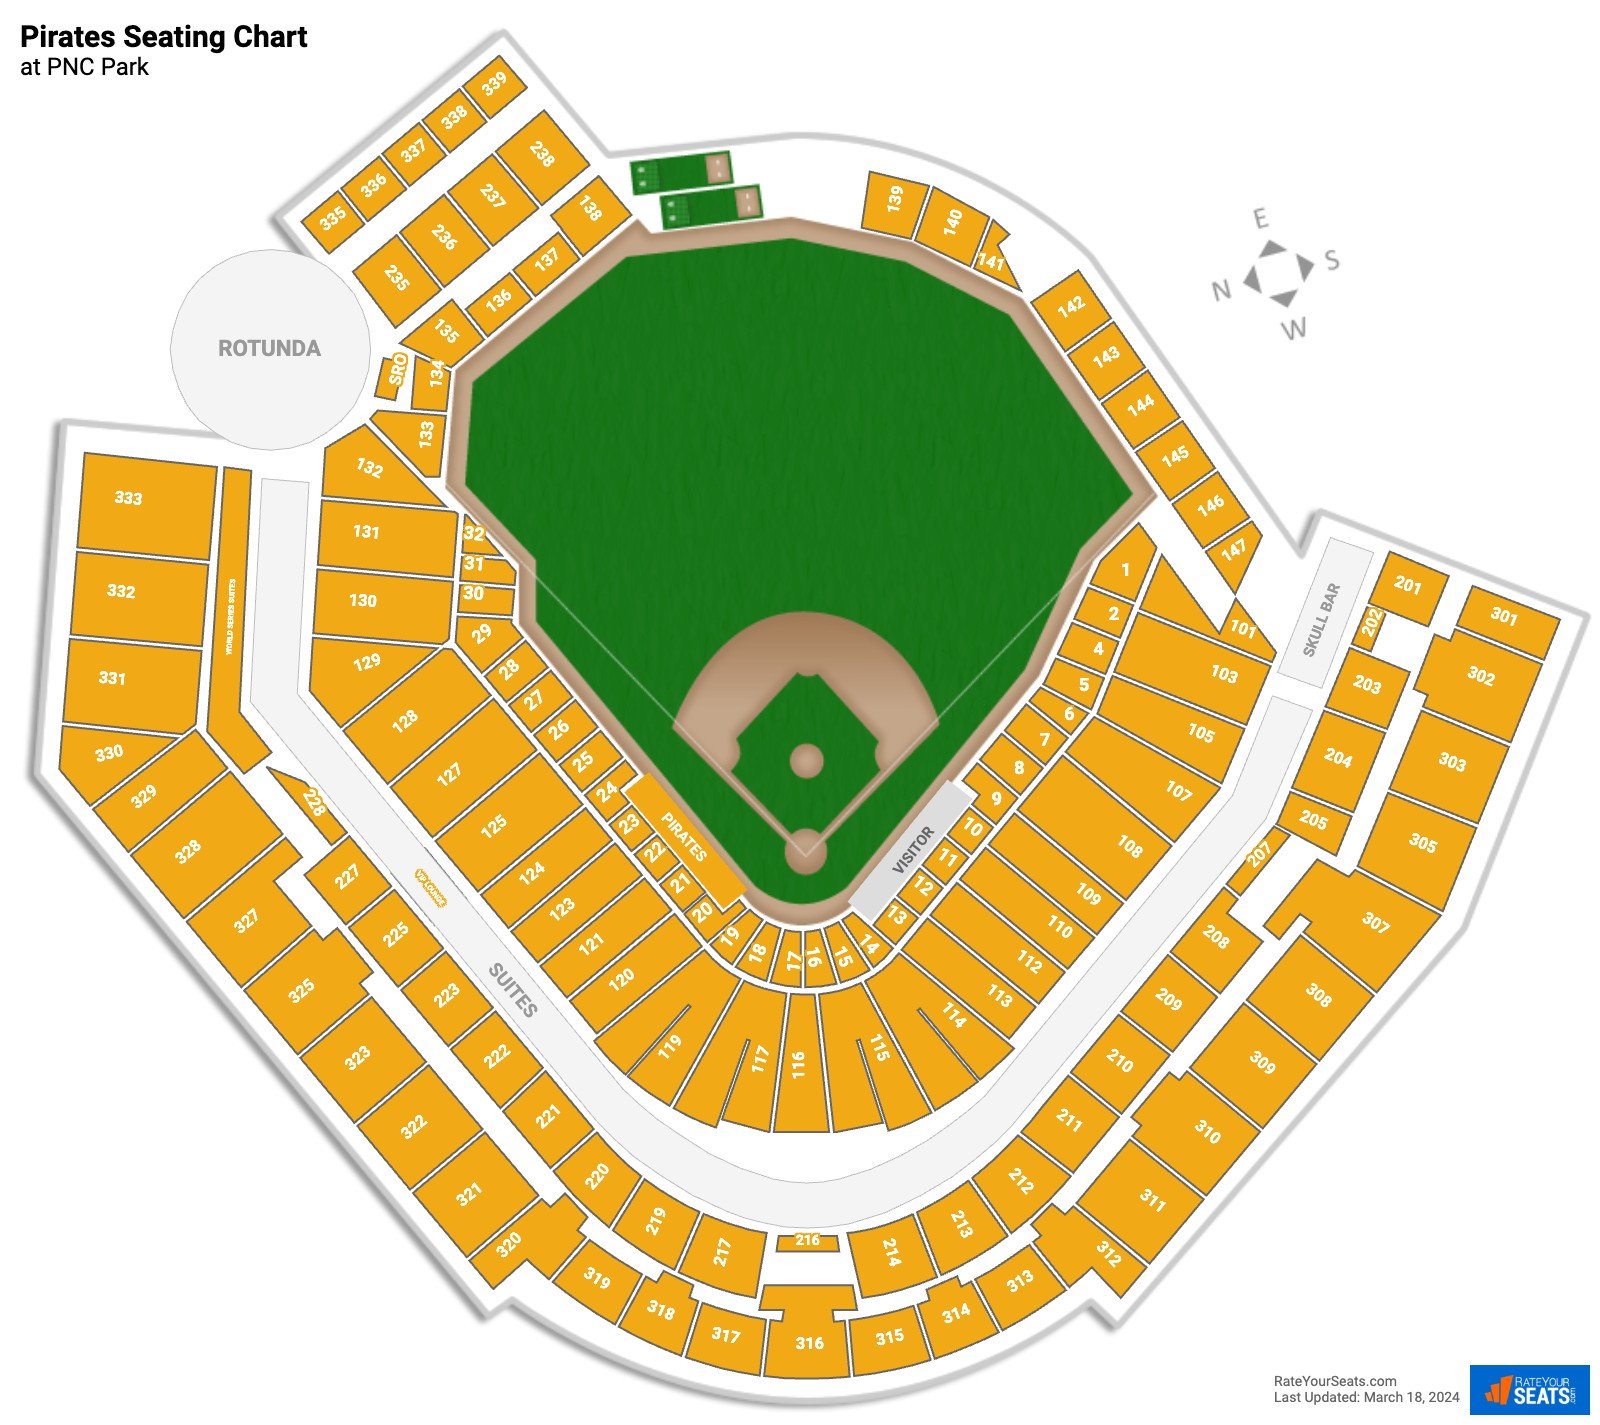 Pittsburgh Pirates Seating Chart at PNC Park